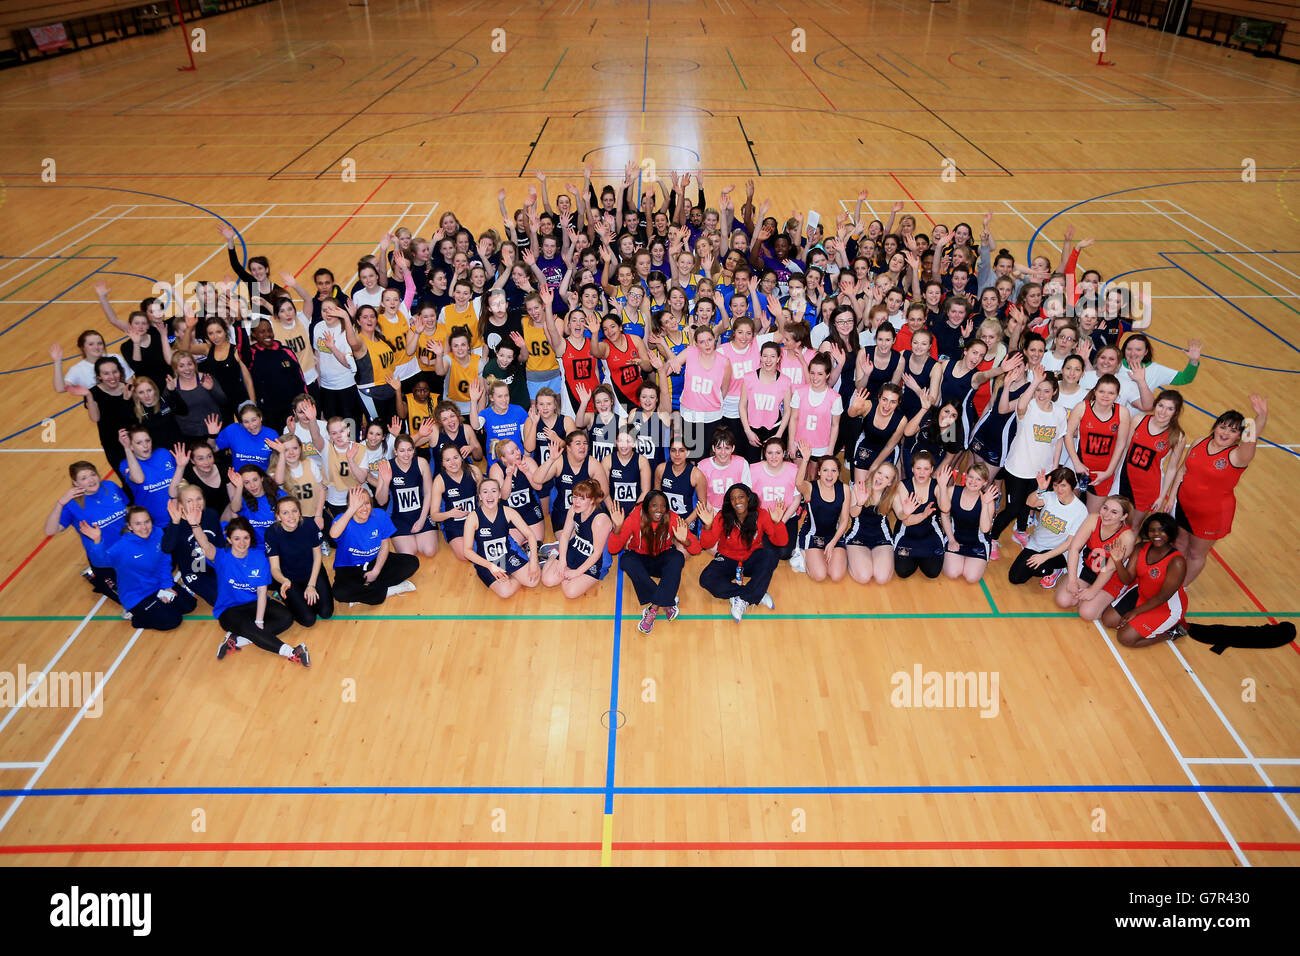 Netball - Netball in the City - Copper Box Arena. A group photograph of all competitors during the Netball in the City event at the Copper Box Arena, London Stock Photo